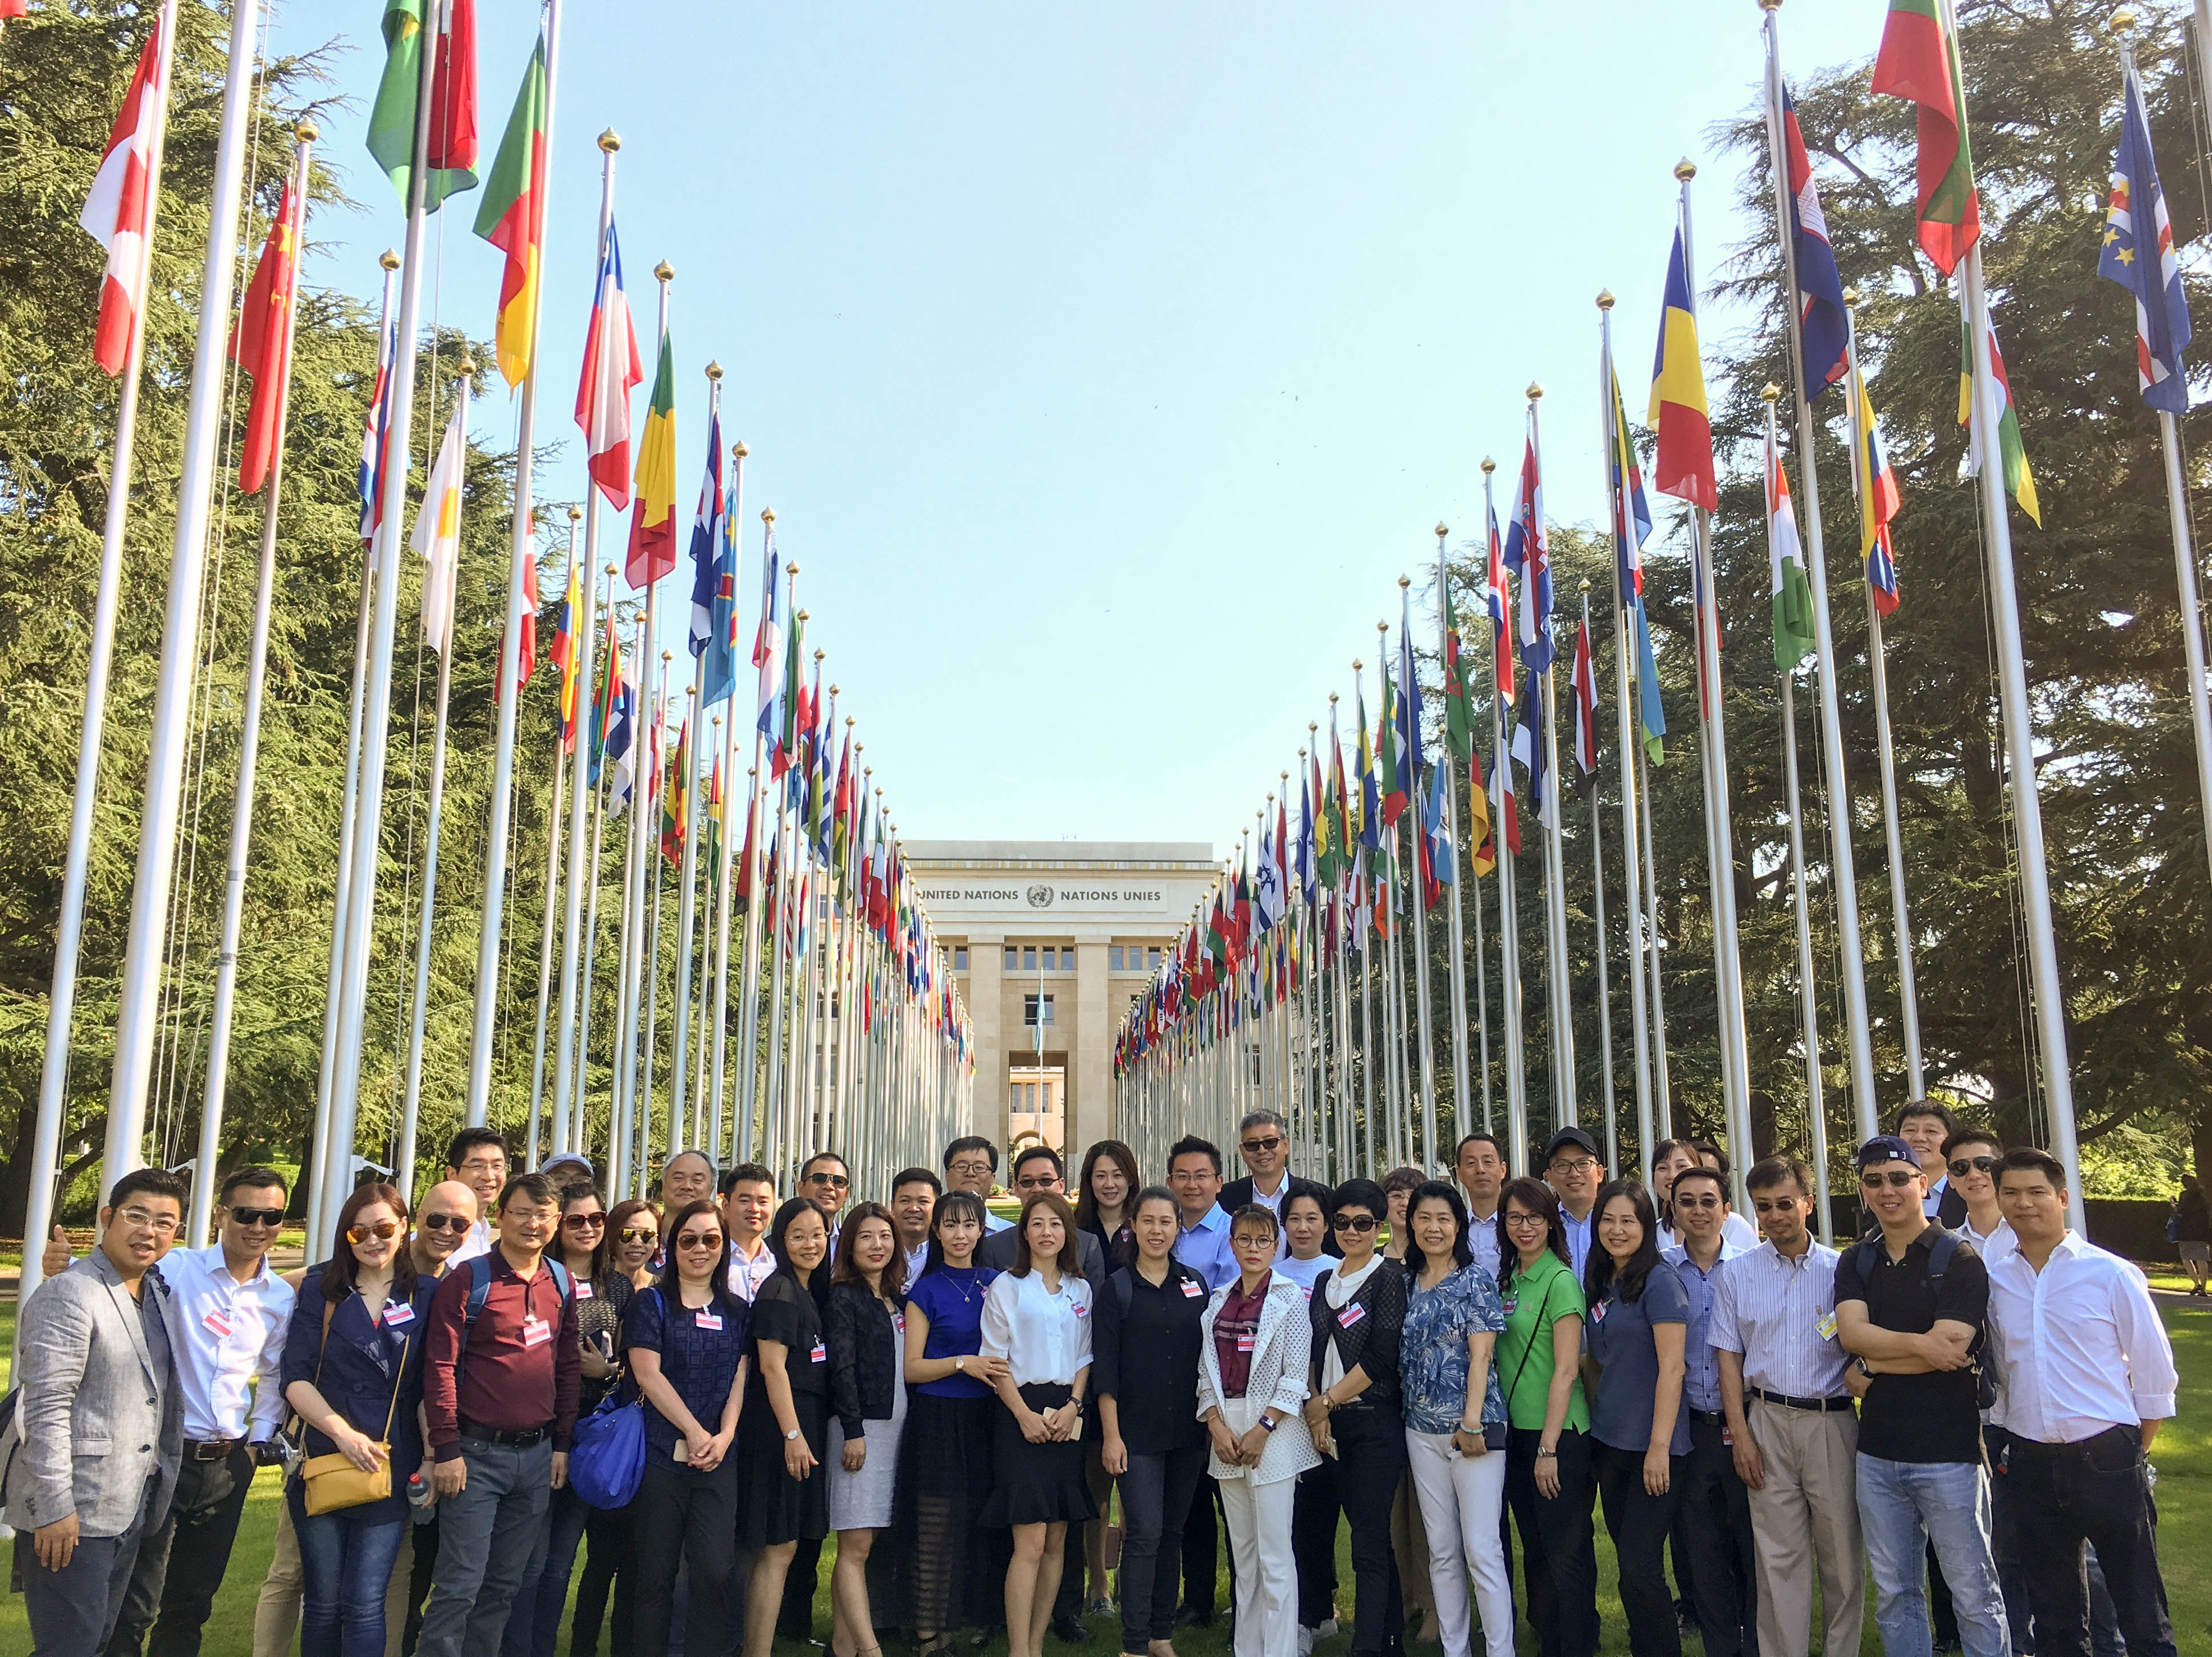 City University offers a 10-day training programme in partnership with Tsinghua University and the UN Economic Commission for Europe, on which Western and Eastern cultural values are a component.